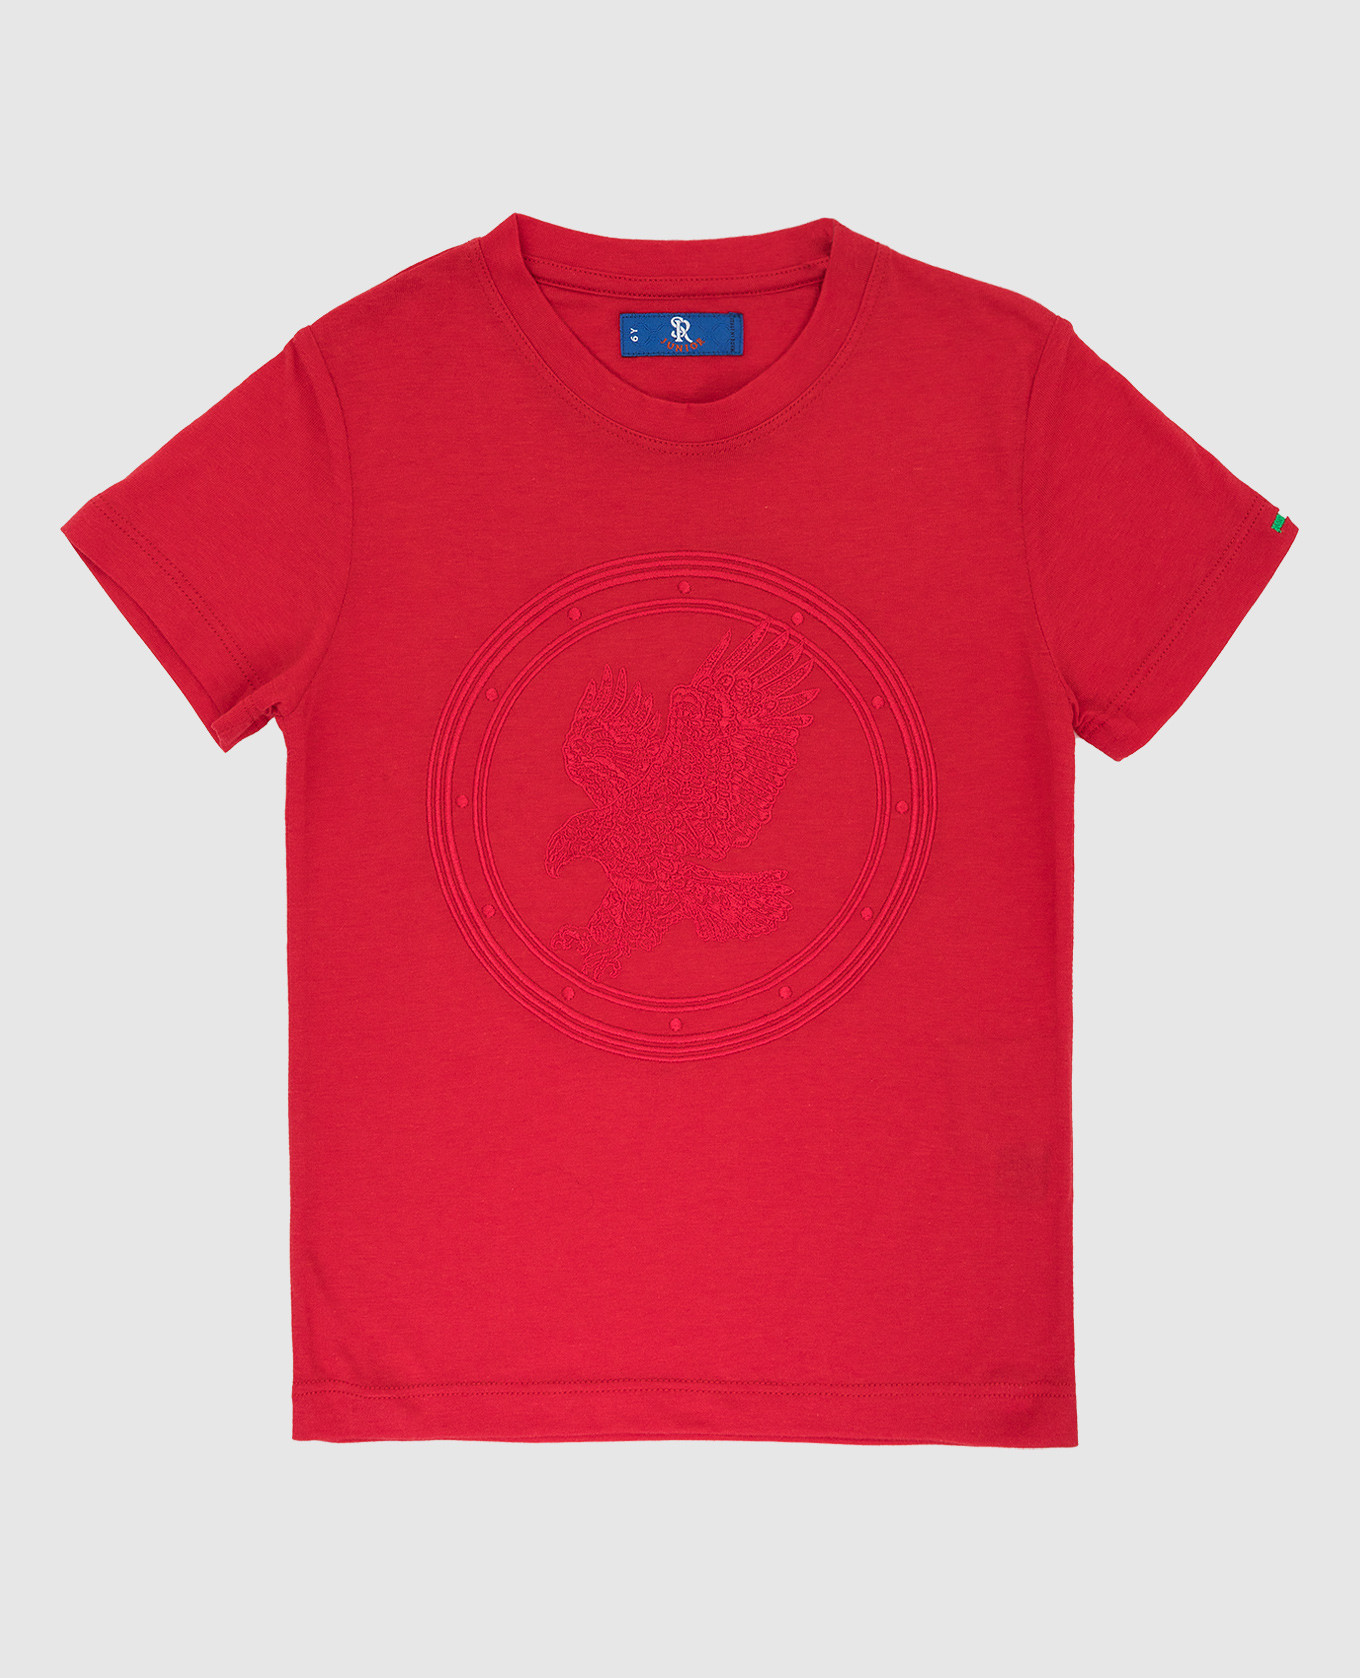 Children's red t-shirt with embroidery